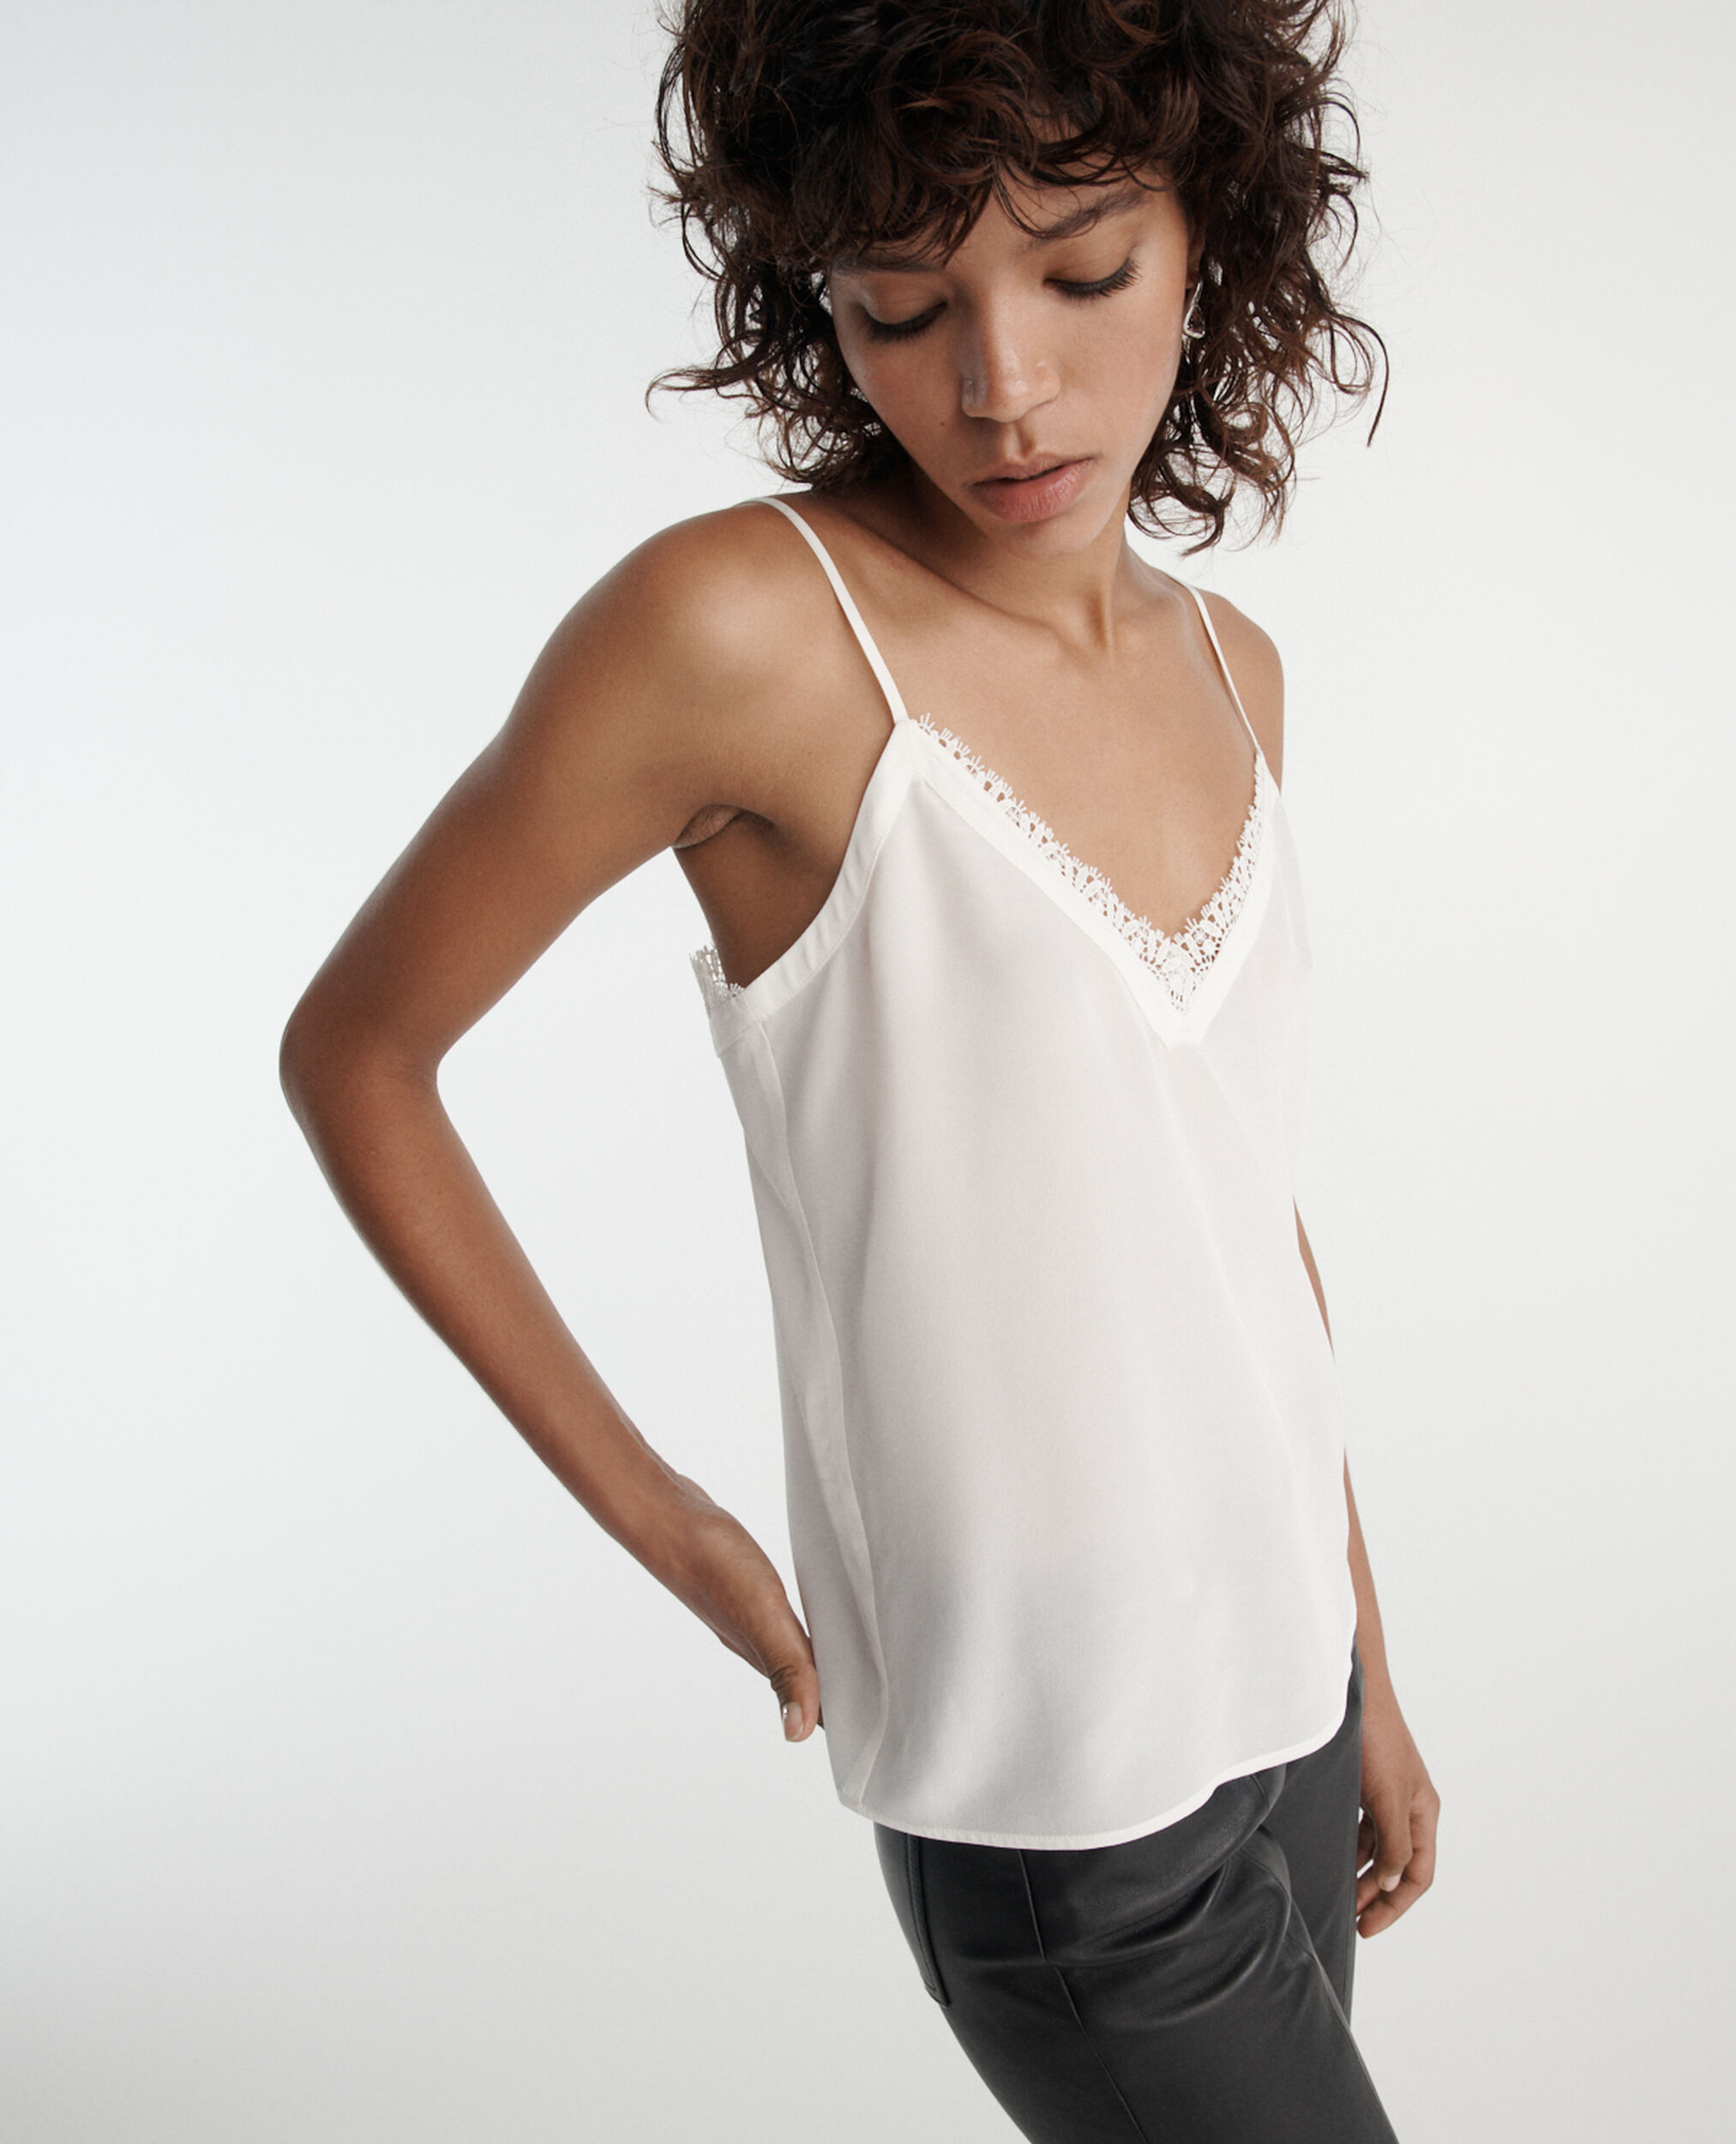 Ecru silk camisole with V-neck and lace back, ECRU, hi-res image number null